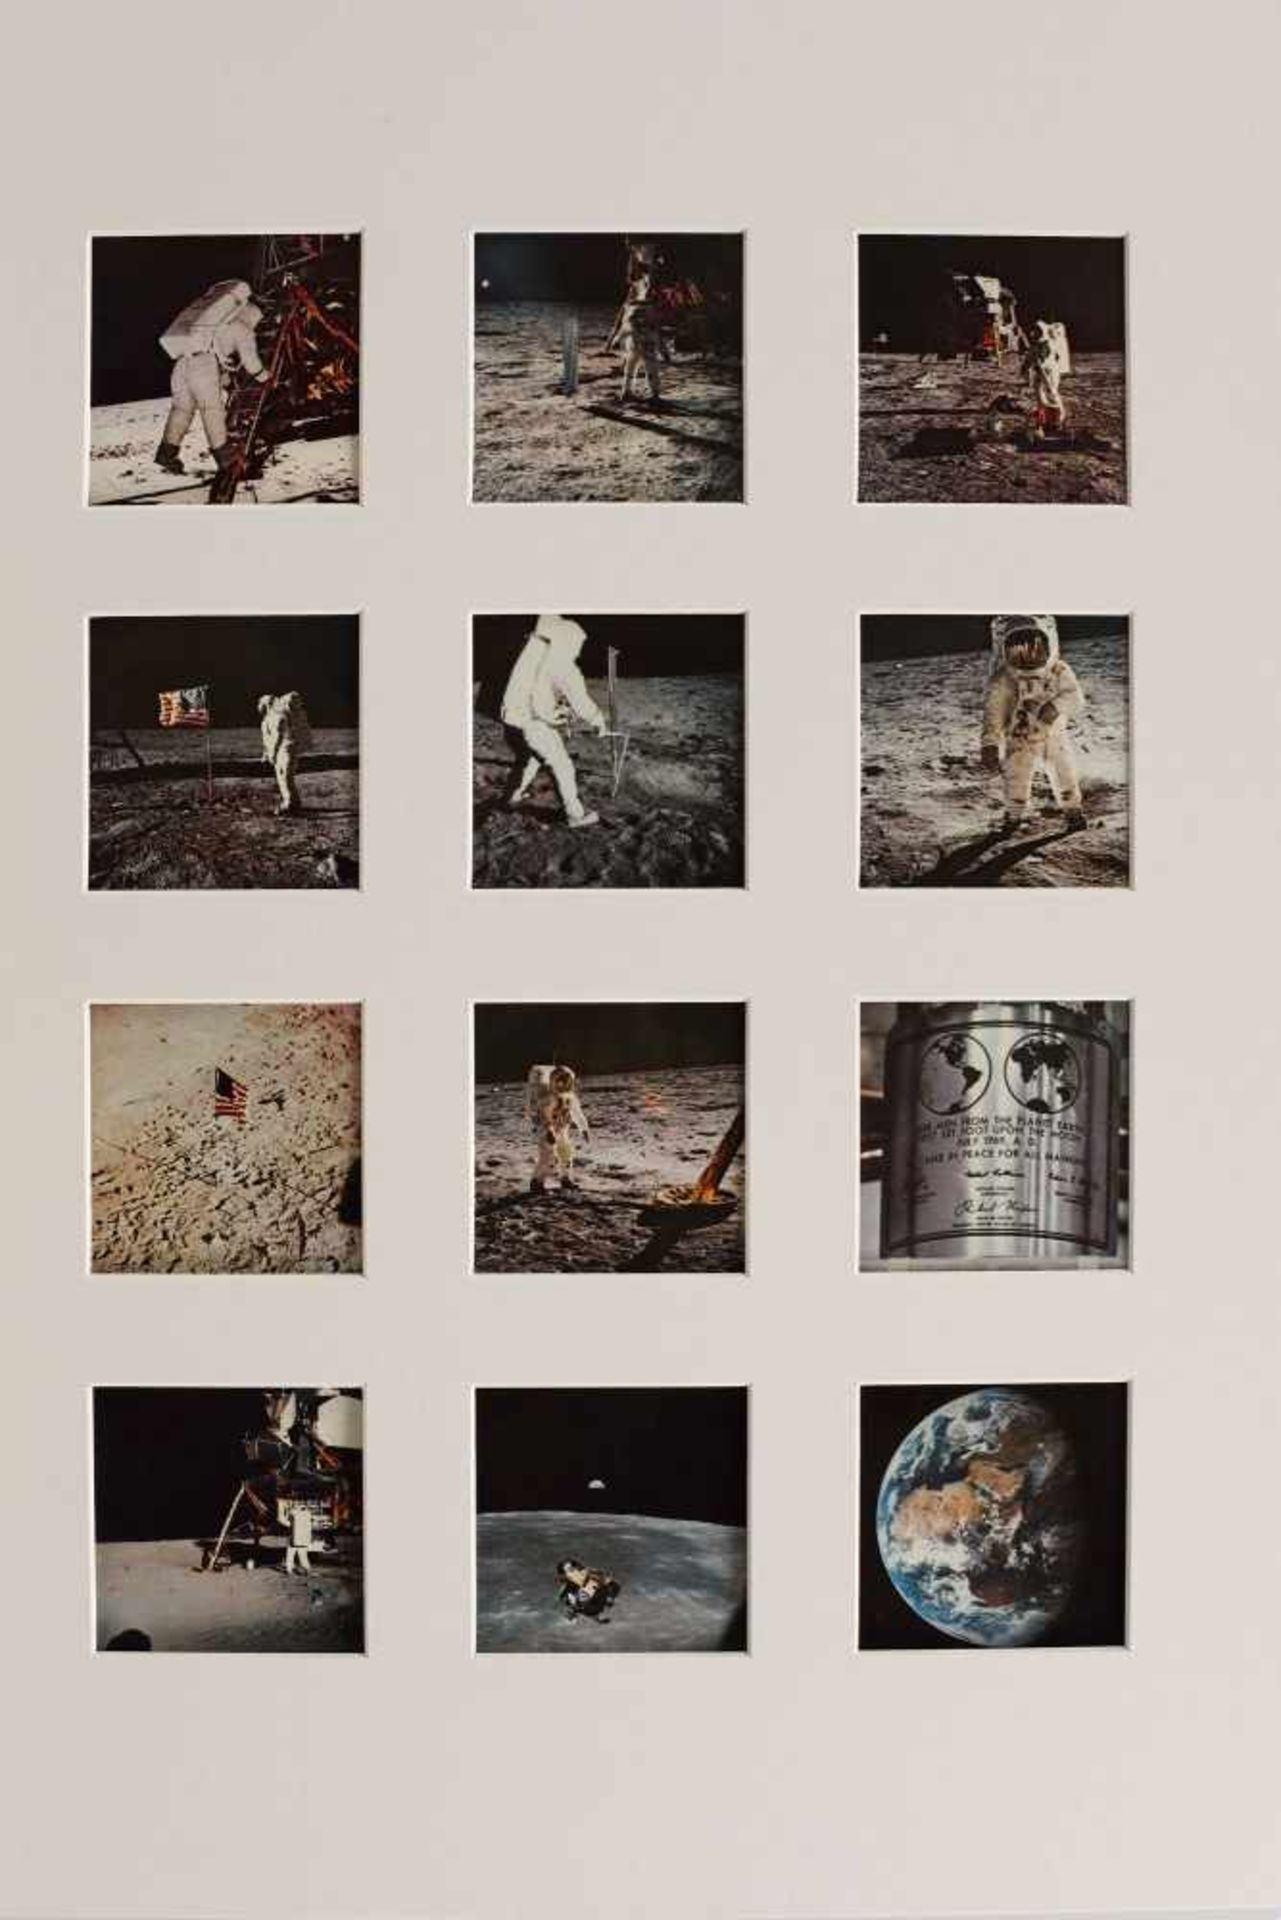 Set of 12 photographs from the Apollo 11 space mission, famous for the first Moon landing, July 1969